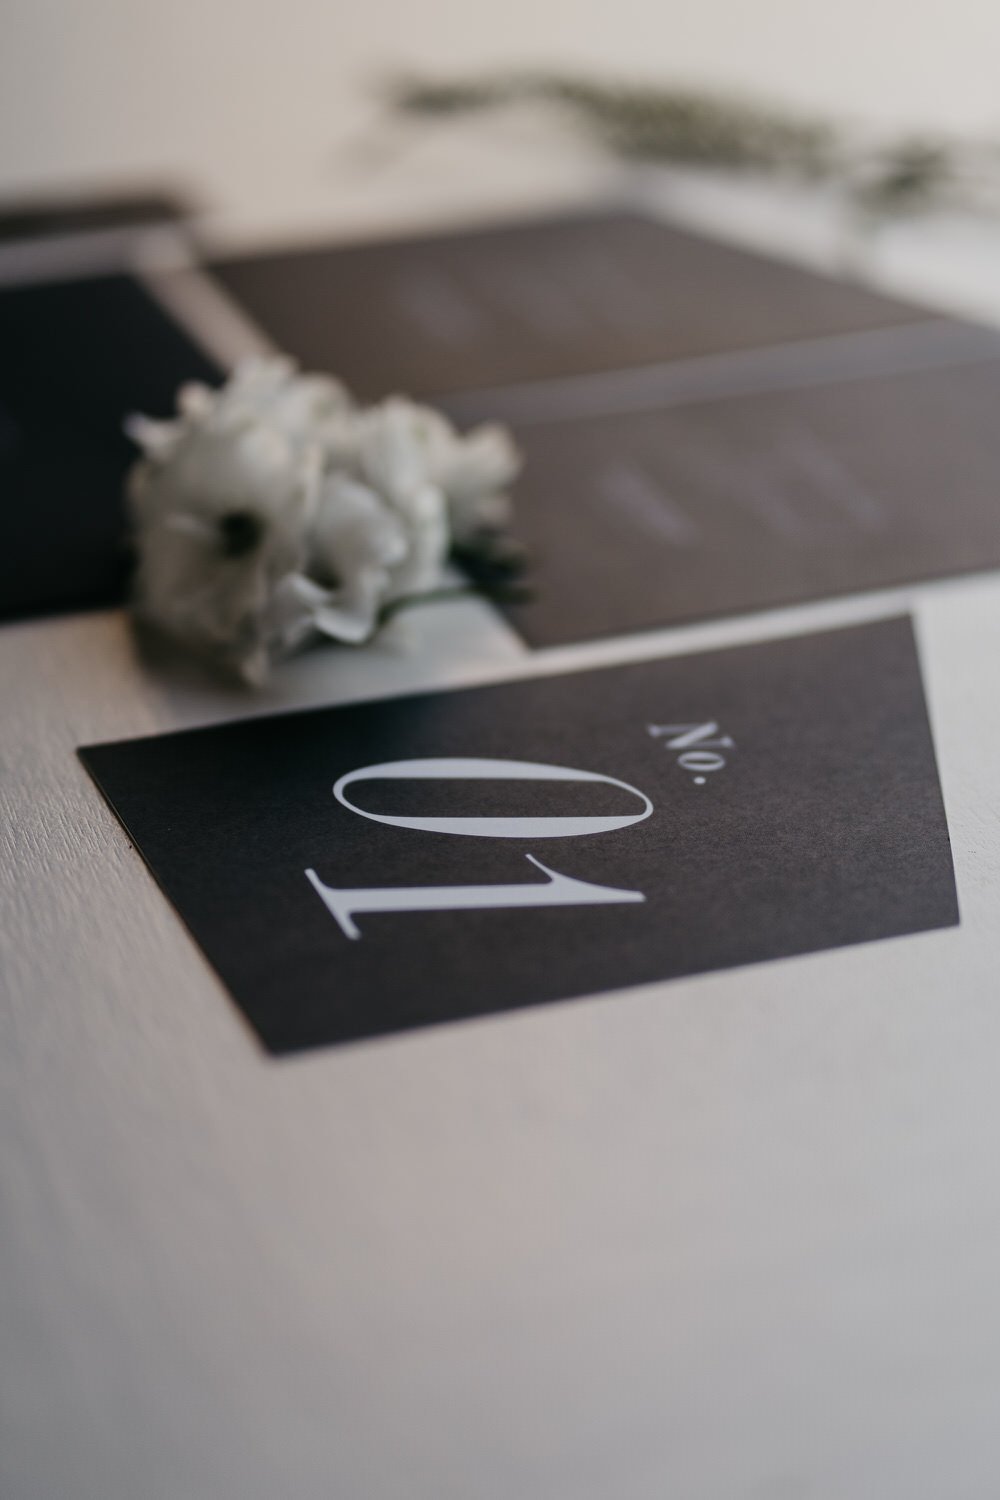 Just My Type Wedding Invitation Stationery NZ Wedding Menu Place Name Table Number0826.JPG